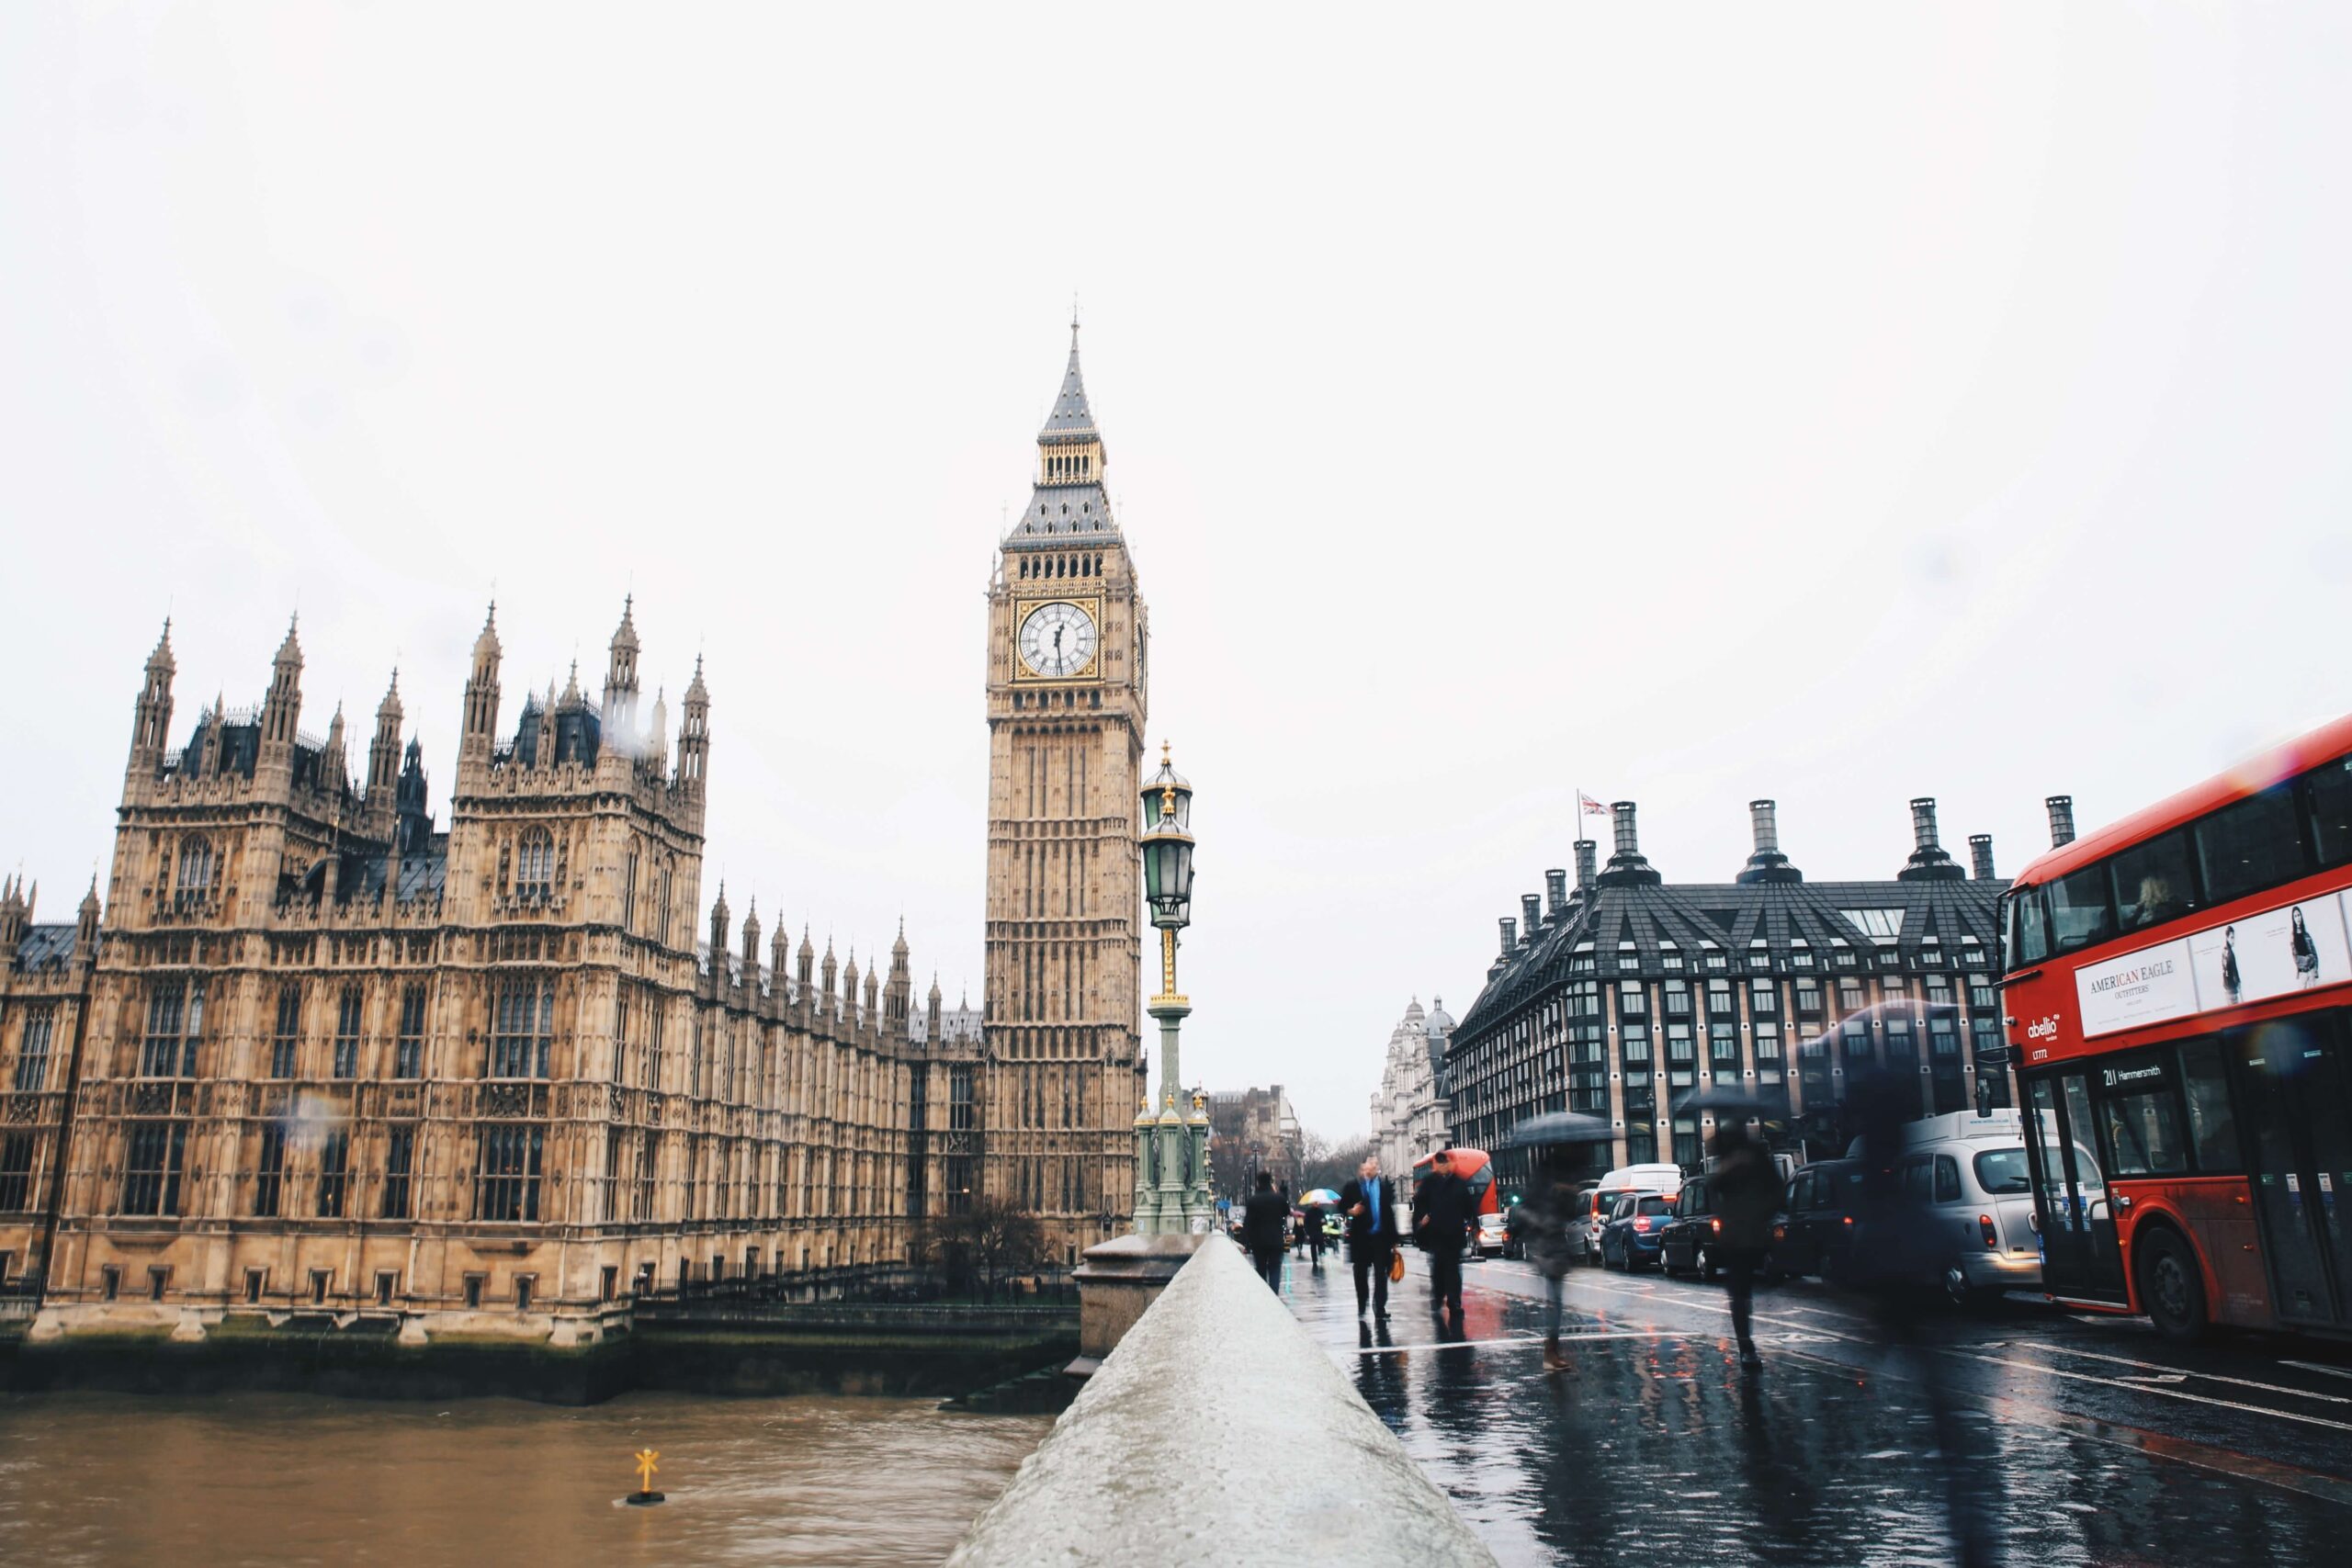 The Houses of Parliament are a symbol for pursuing a career in politics.